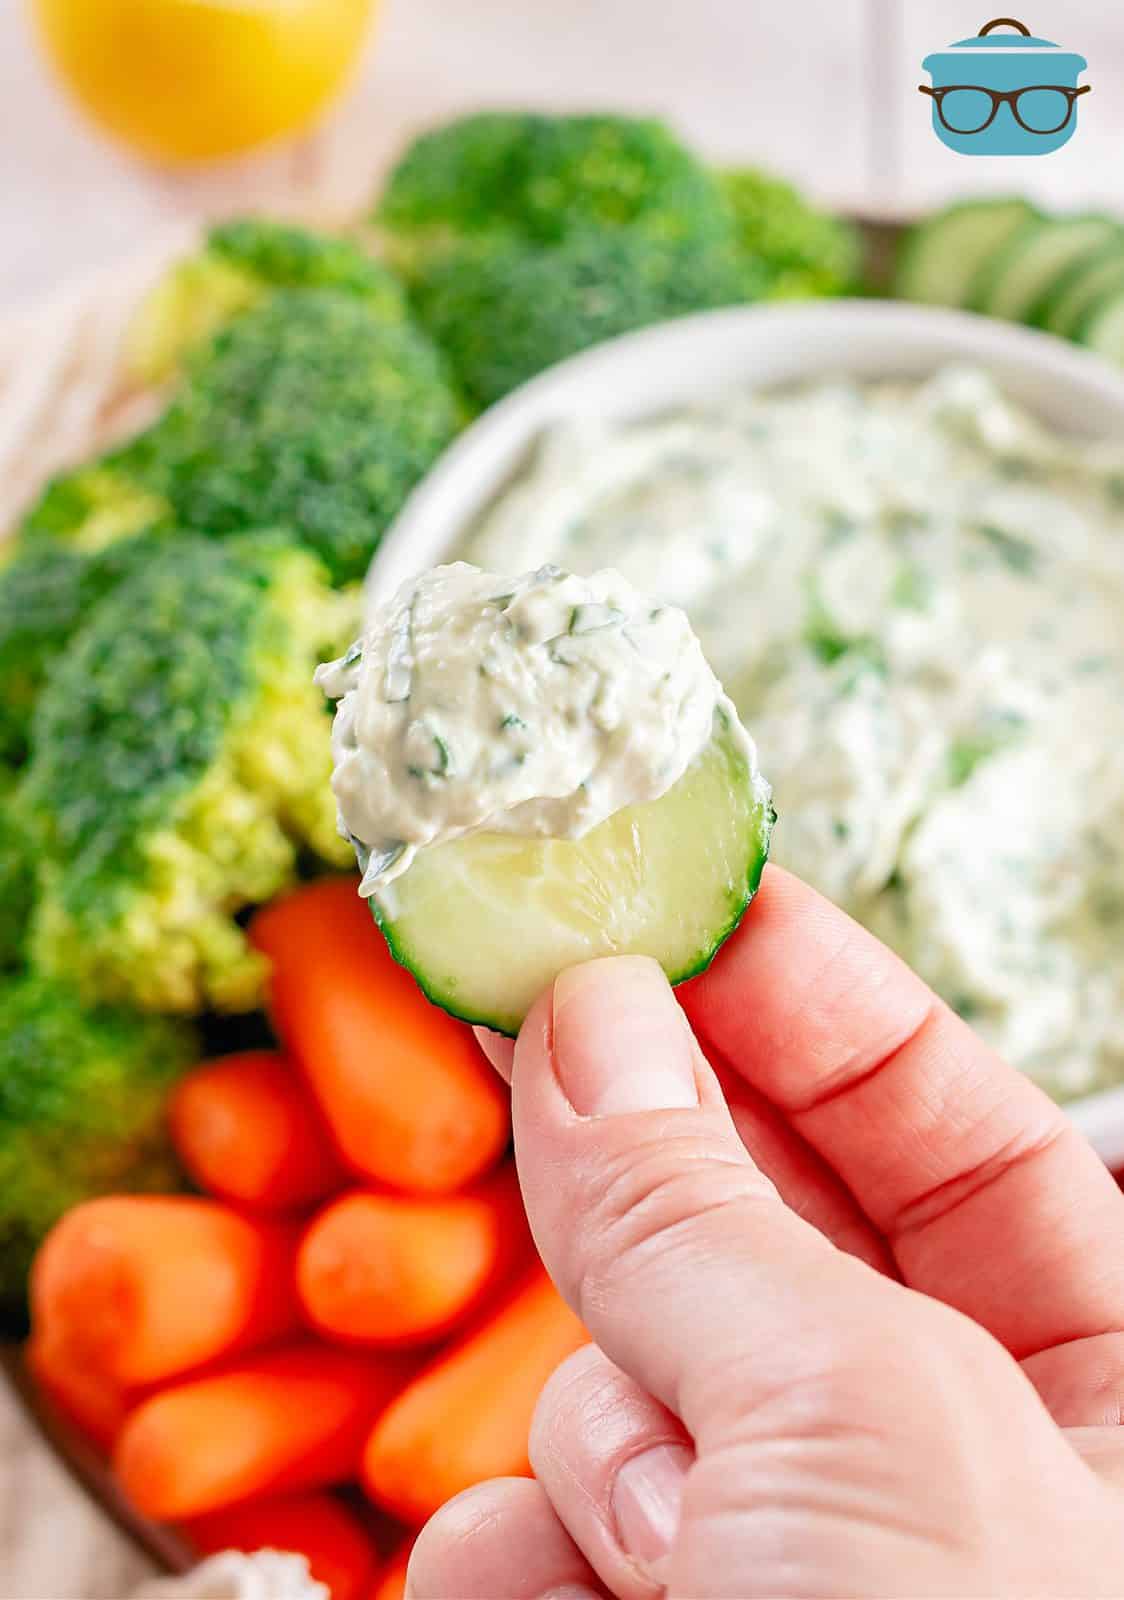 Hand holding up a cucumber with dip on it.